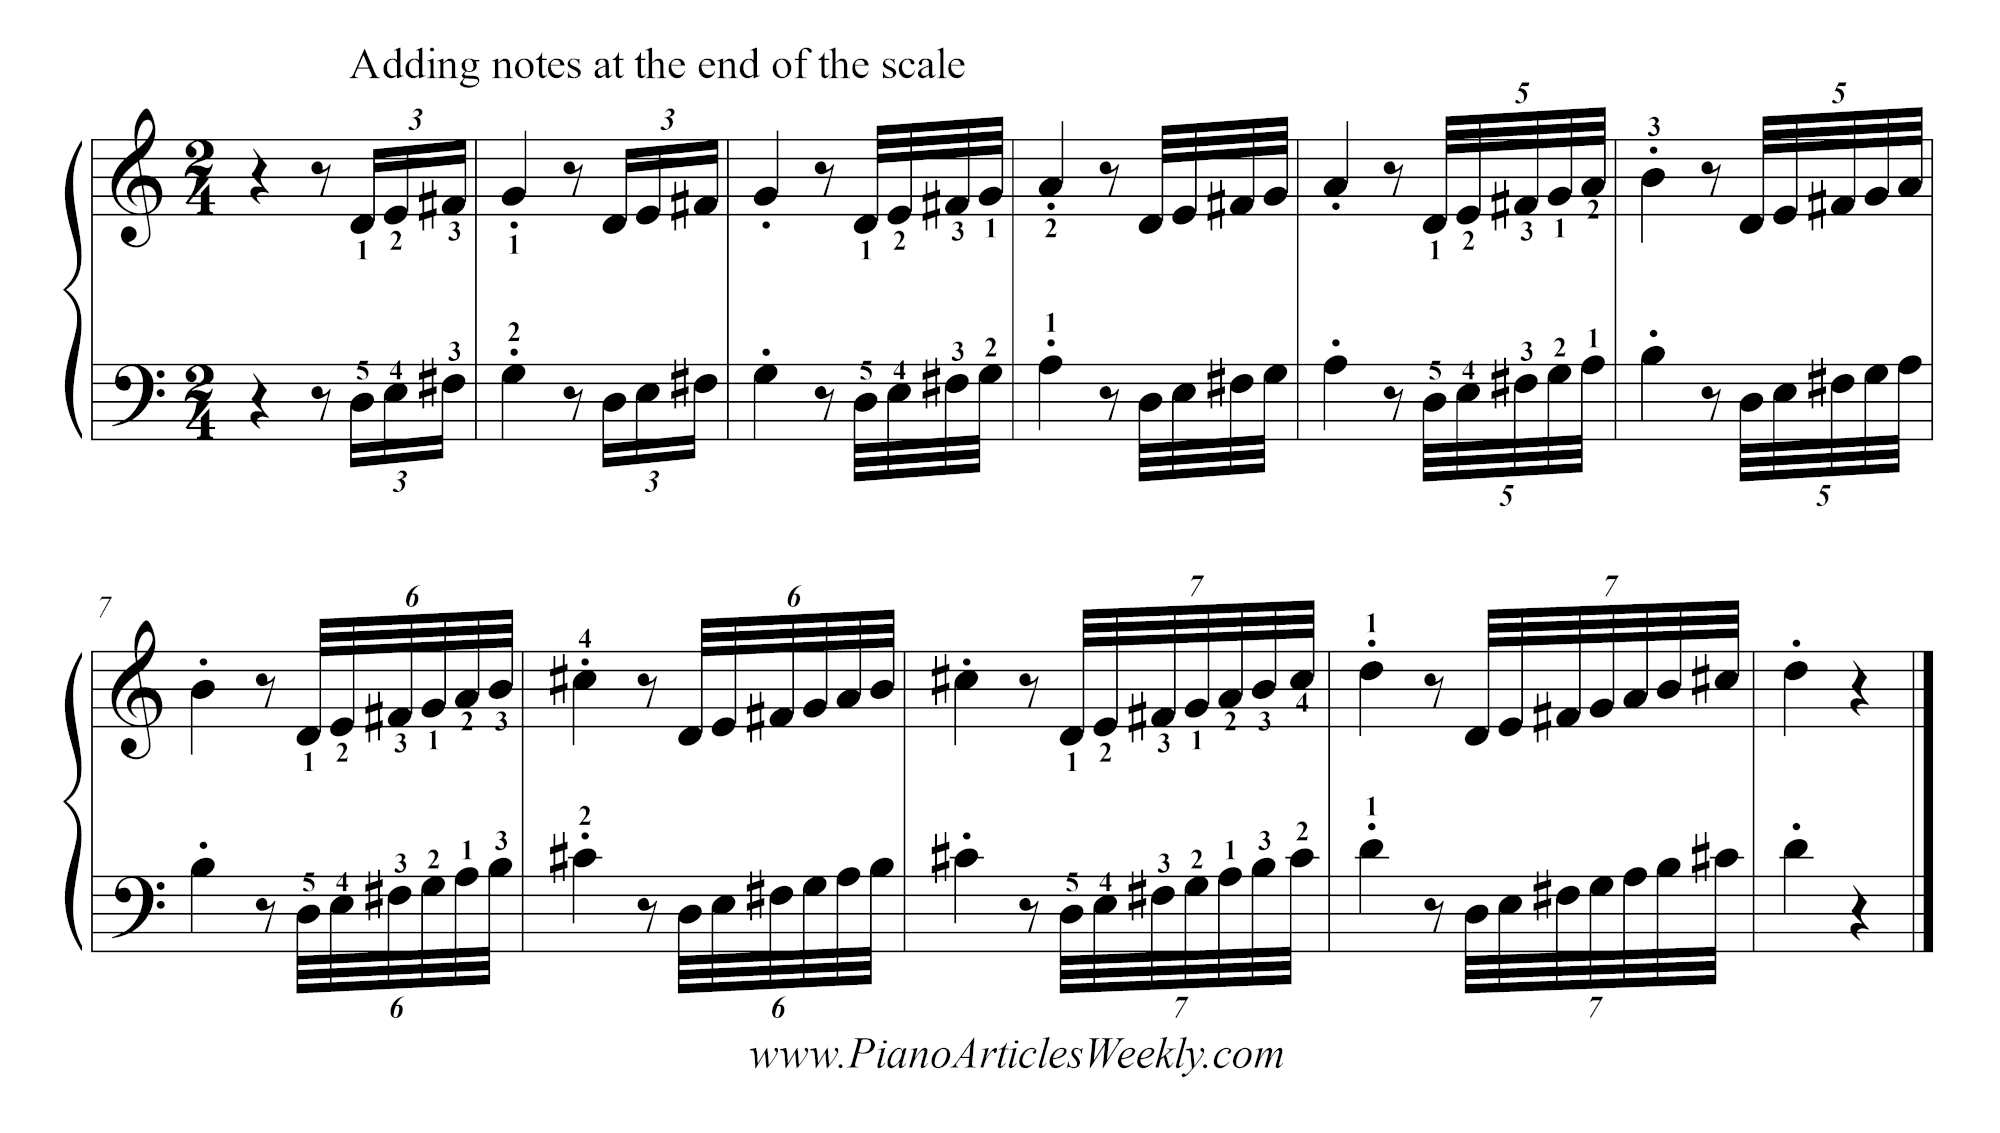 D major piano scale - advanced exercise note addition after the scale